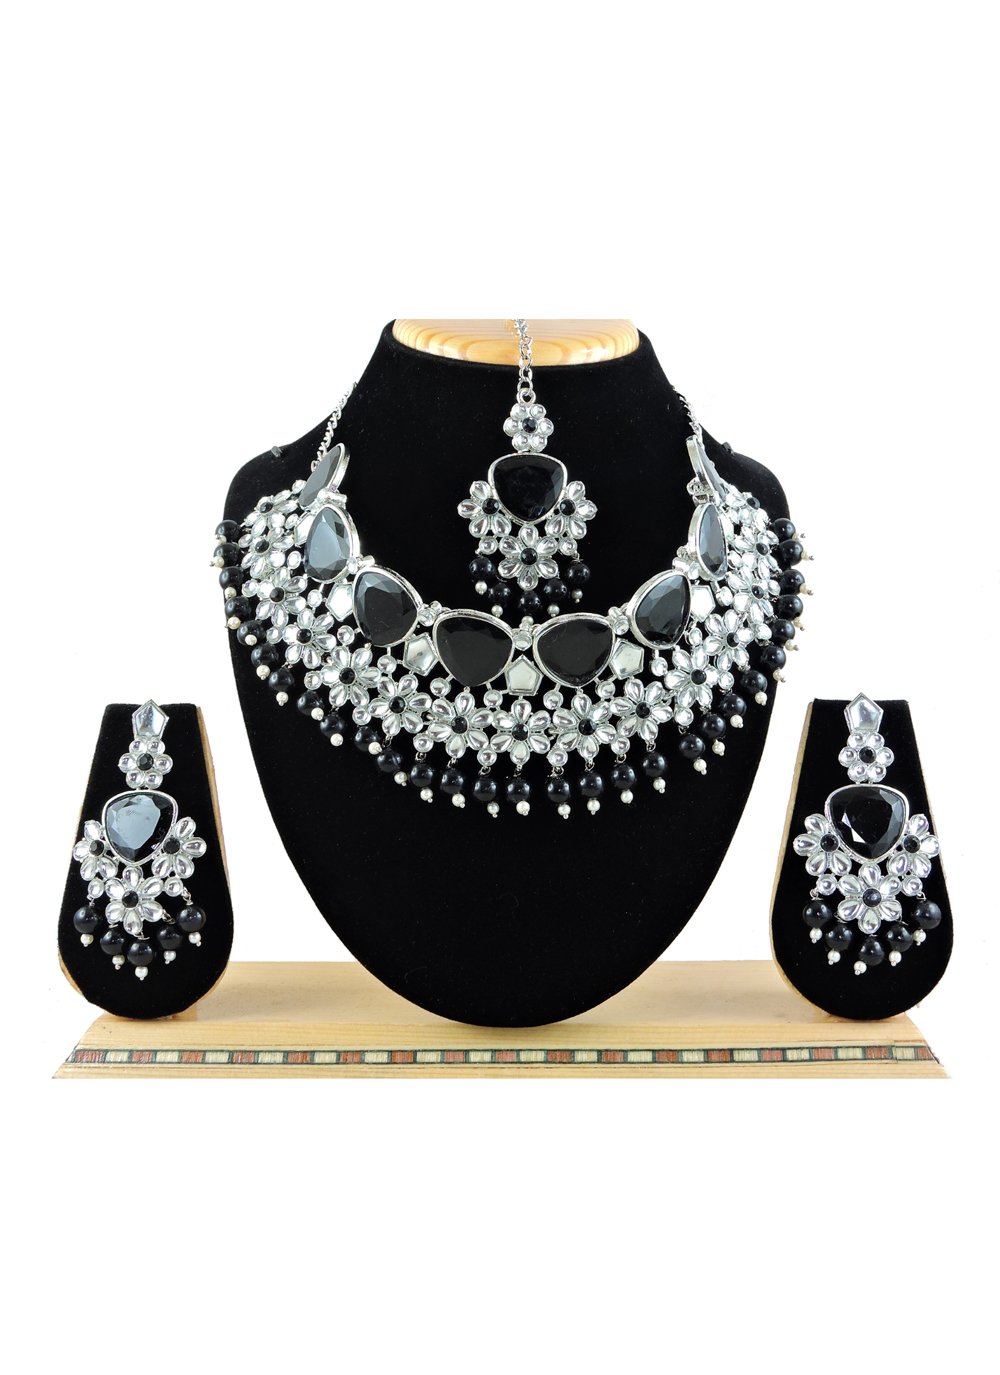 Trendy Beads Work Alloy Gold Rodium Polish Necklace Set For Festival